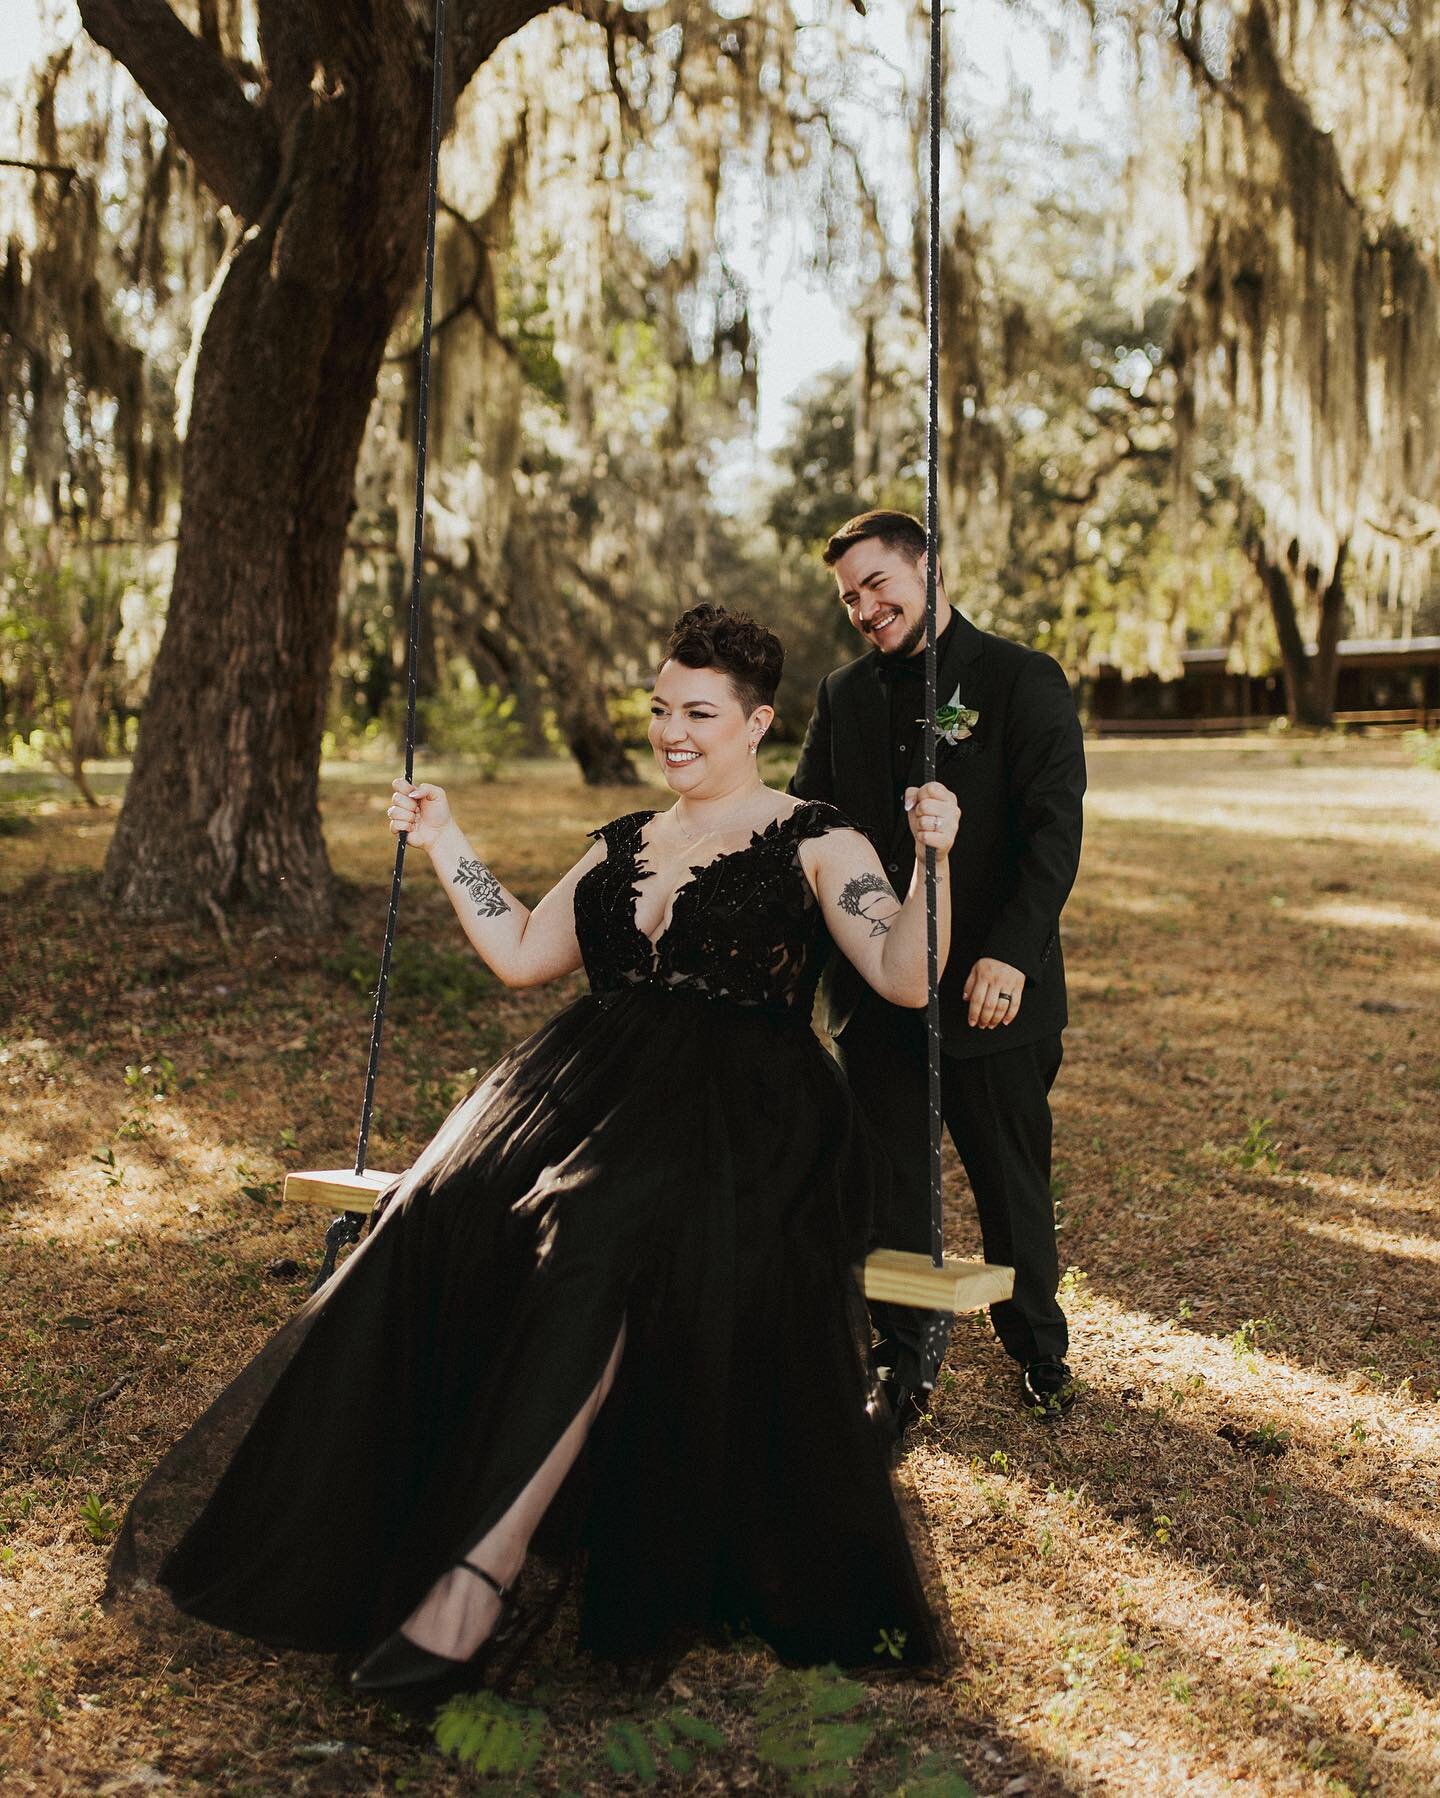 A black dress affair. Get it? Like black tie but it&rsquo;s a black dress. Anyway! I was beyond excited to see this brides black dress. The dress of dreams. Ugh. I just love it so much!!! 
&bull;
&bull;
&bull;

#loveandhappiness #floridaphotographer 